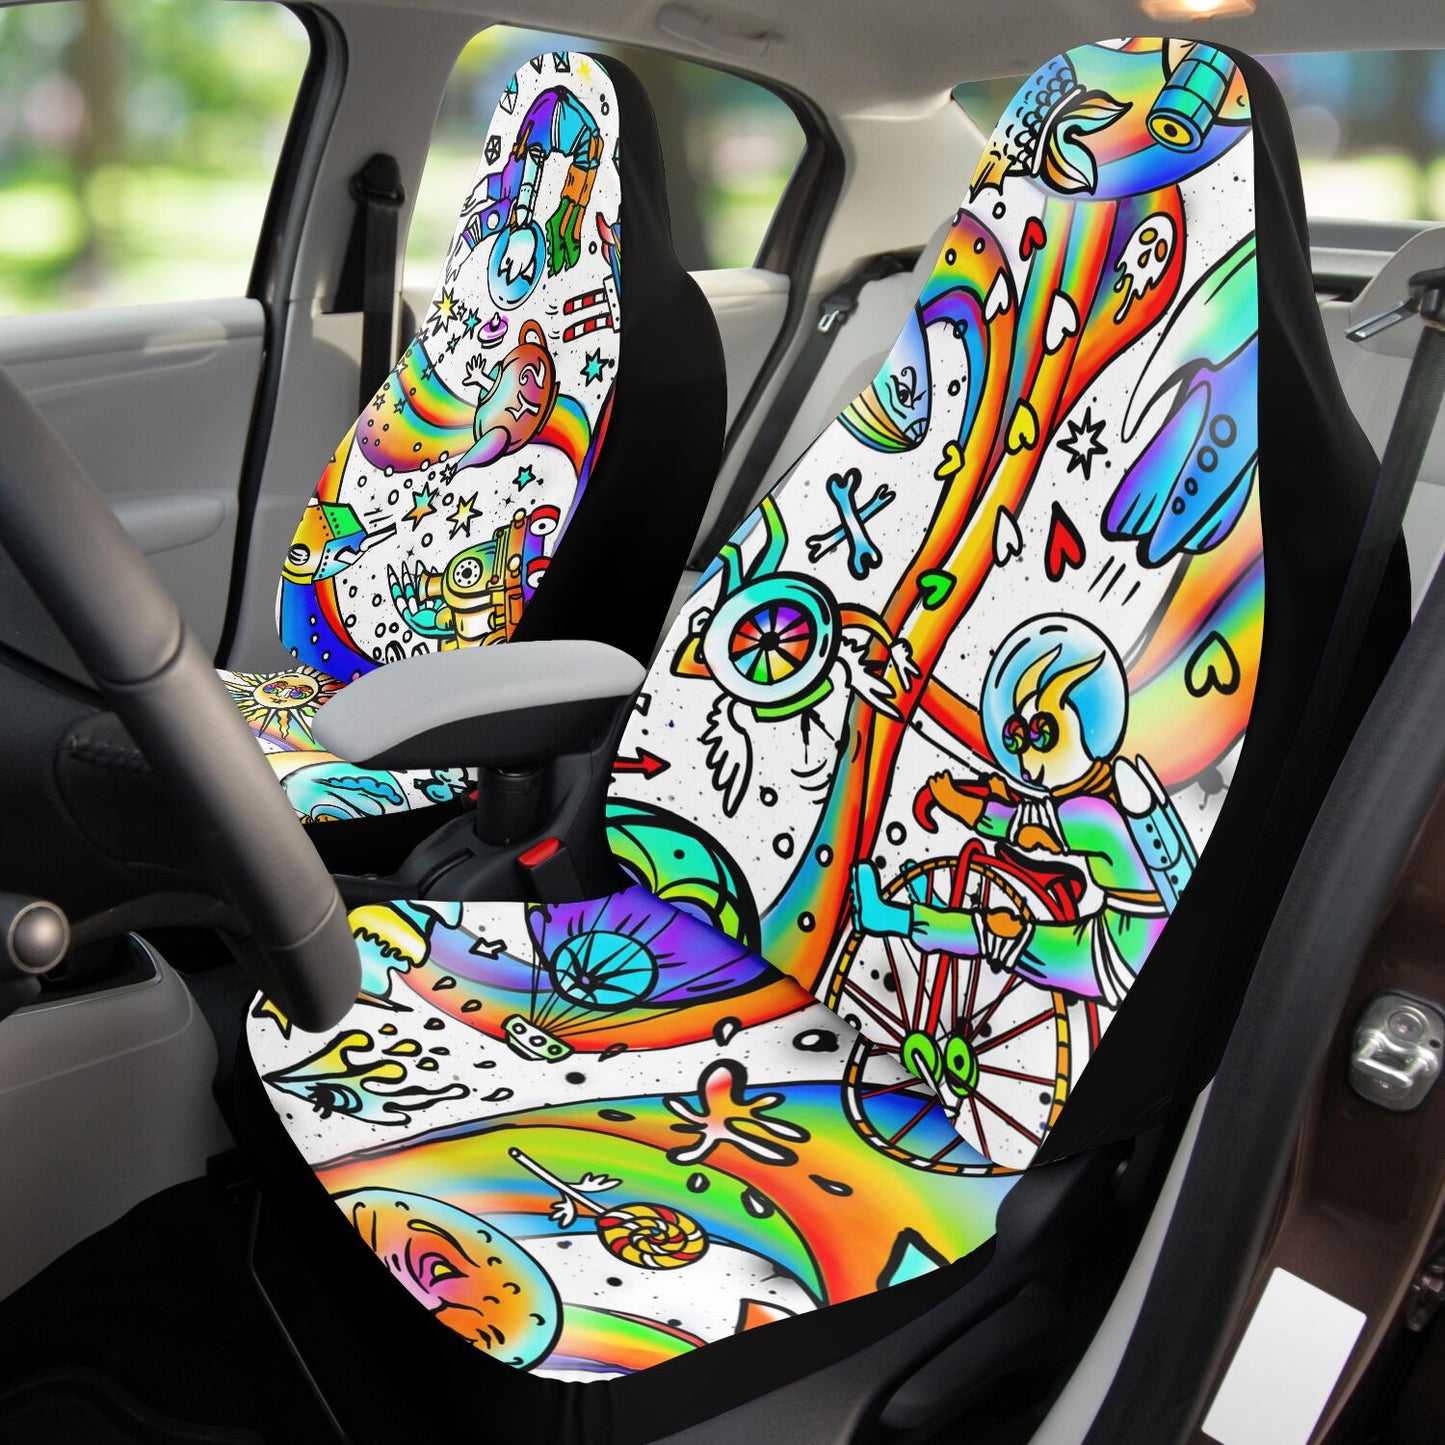 PSY SPACE - Car Seat Covers